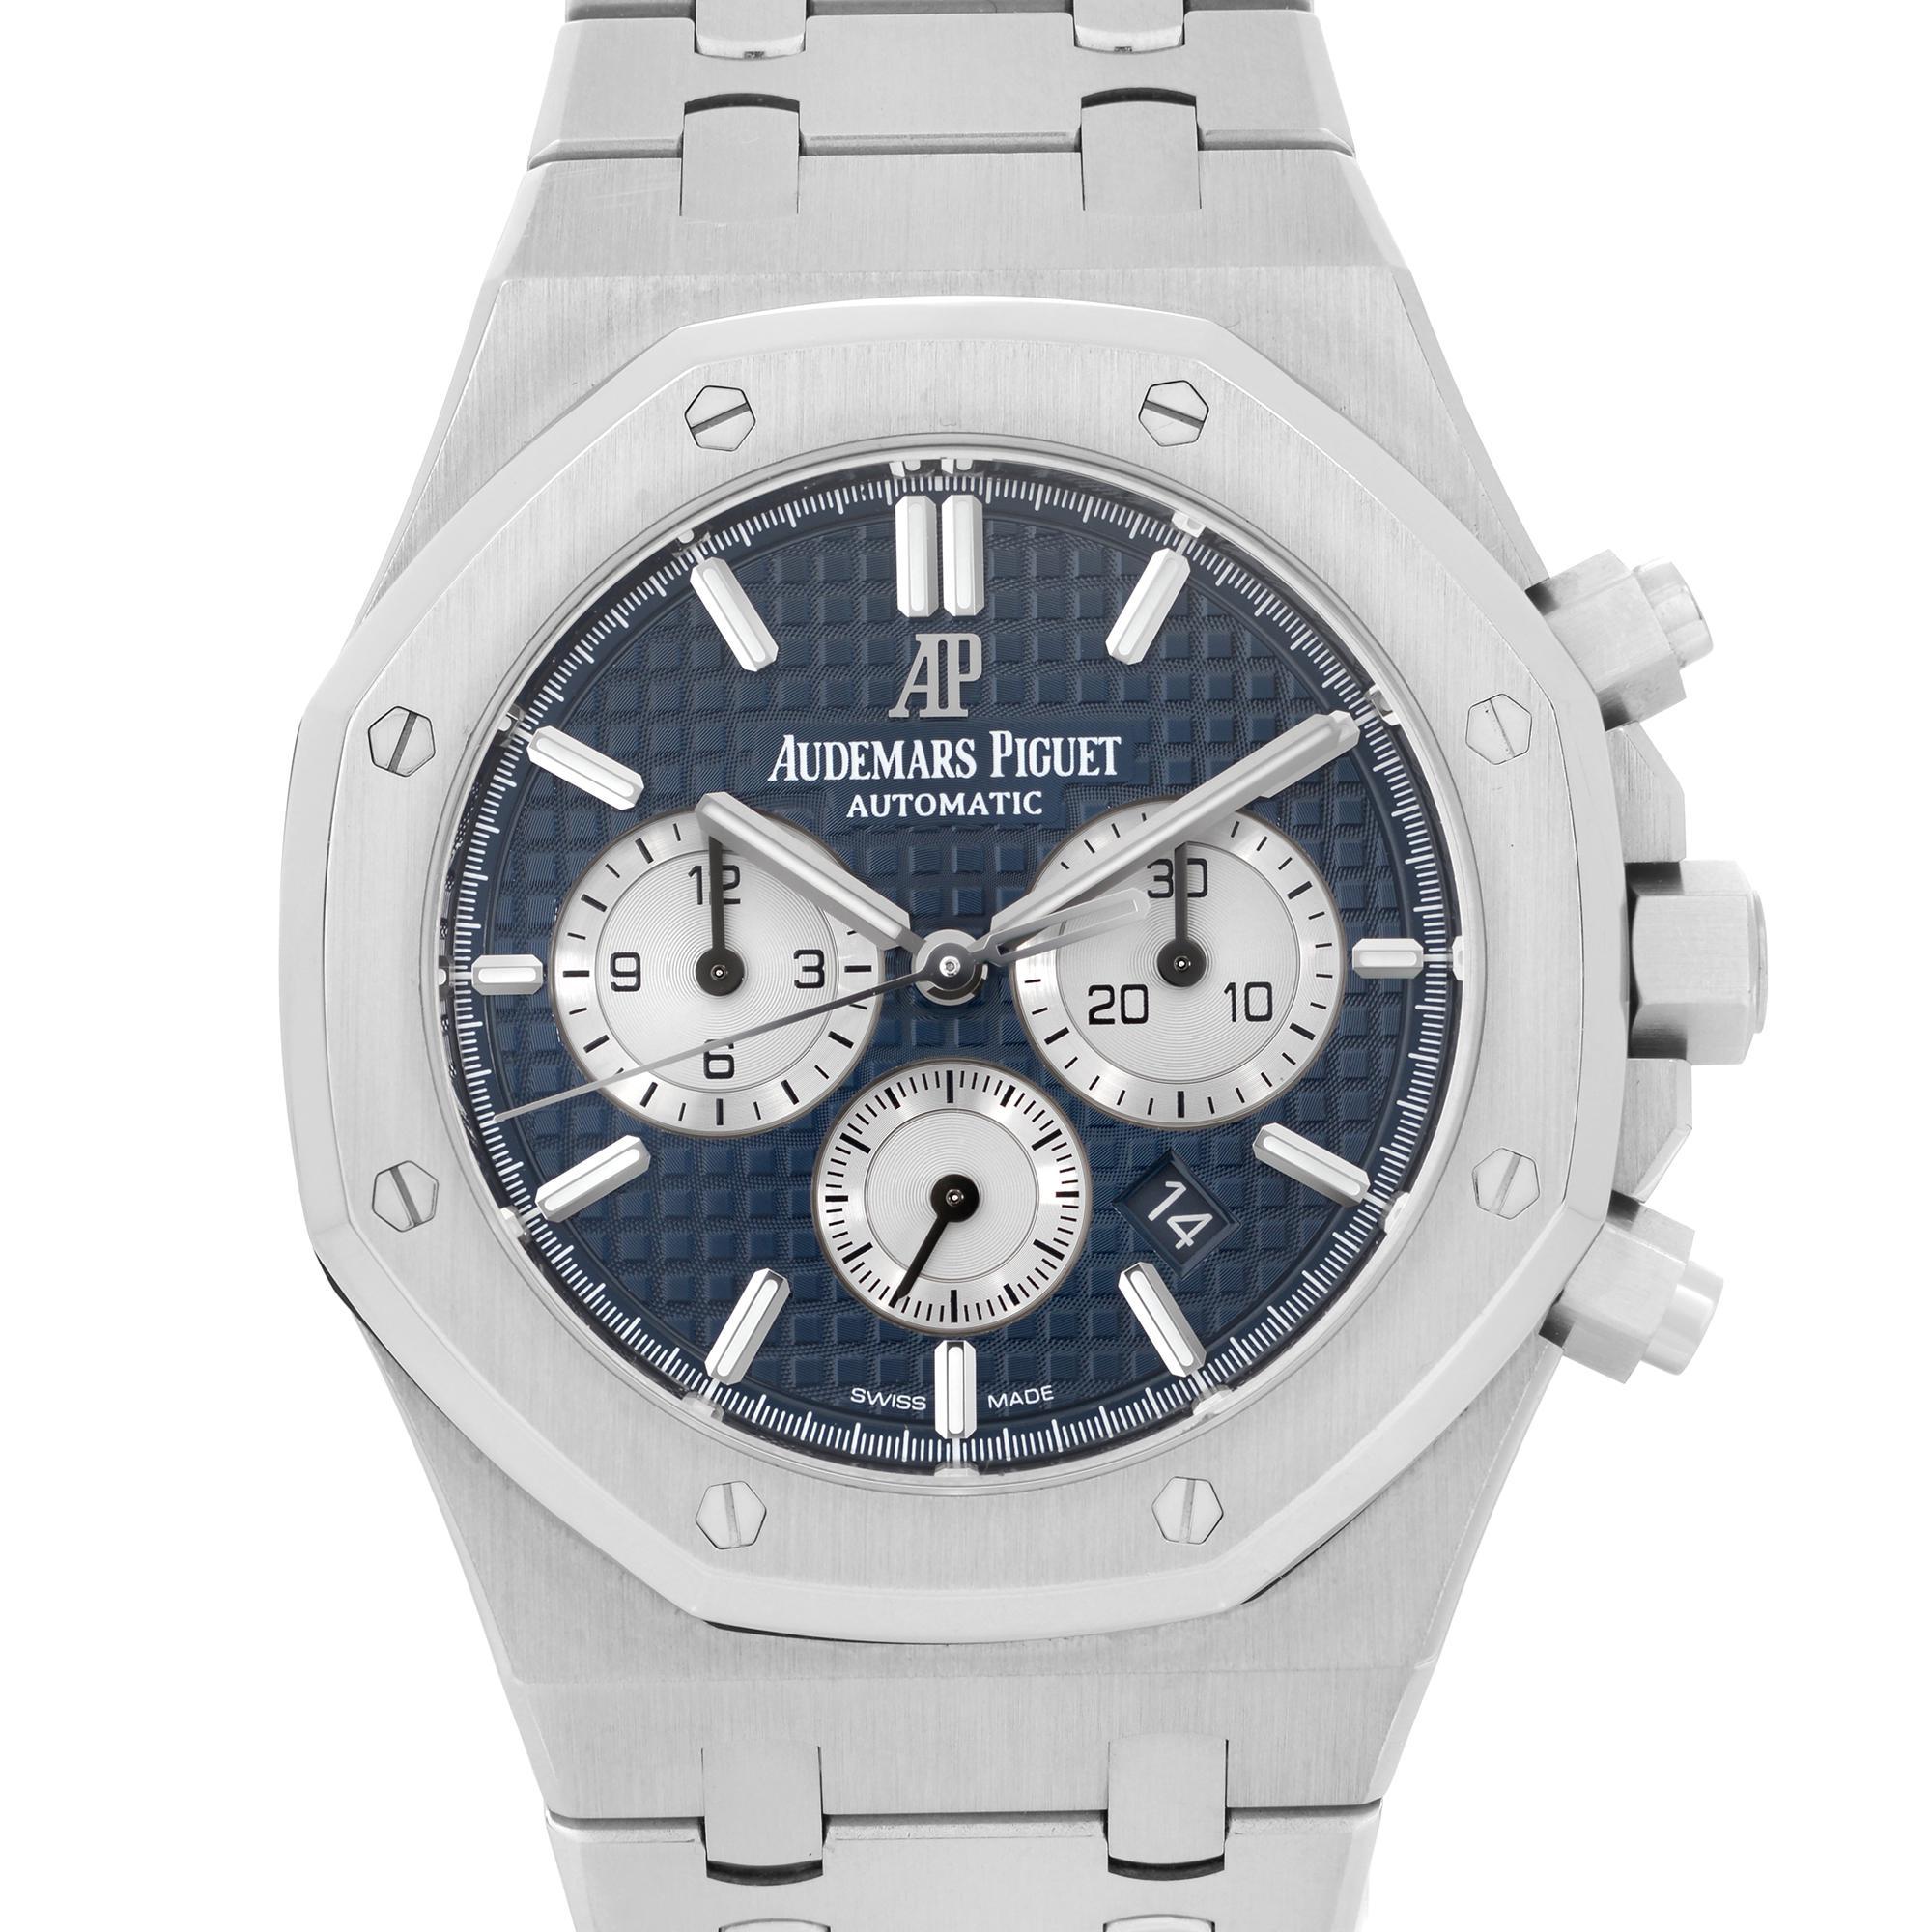 Pre Owned Audemars Piguet Royal Oak Chrono Automatic Mens Watch 26331ST.OO.1220ST.02. This Timepiece is Powered by Mechanical (Automatic) Movement And Features: Stainless Steel and Bracelet, Fixed Octagonal Shaped Steel Bezel, Blue Tapisserie Dial